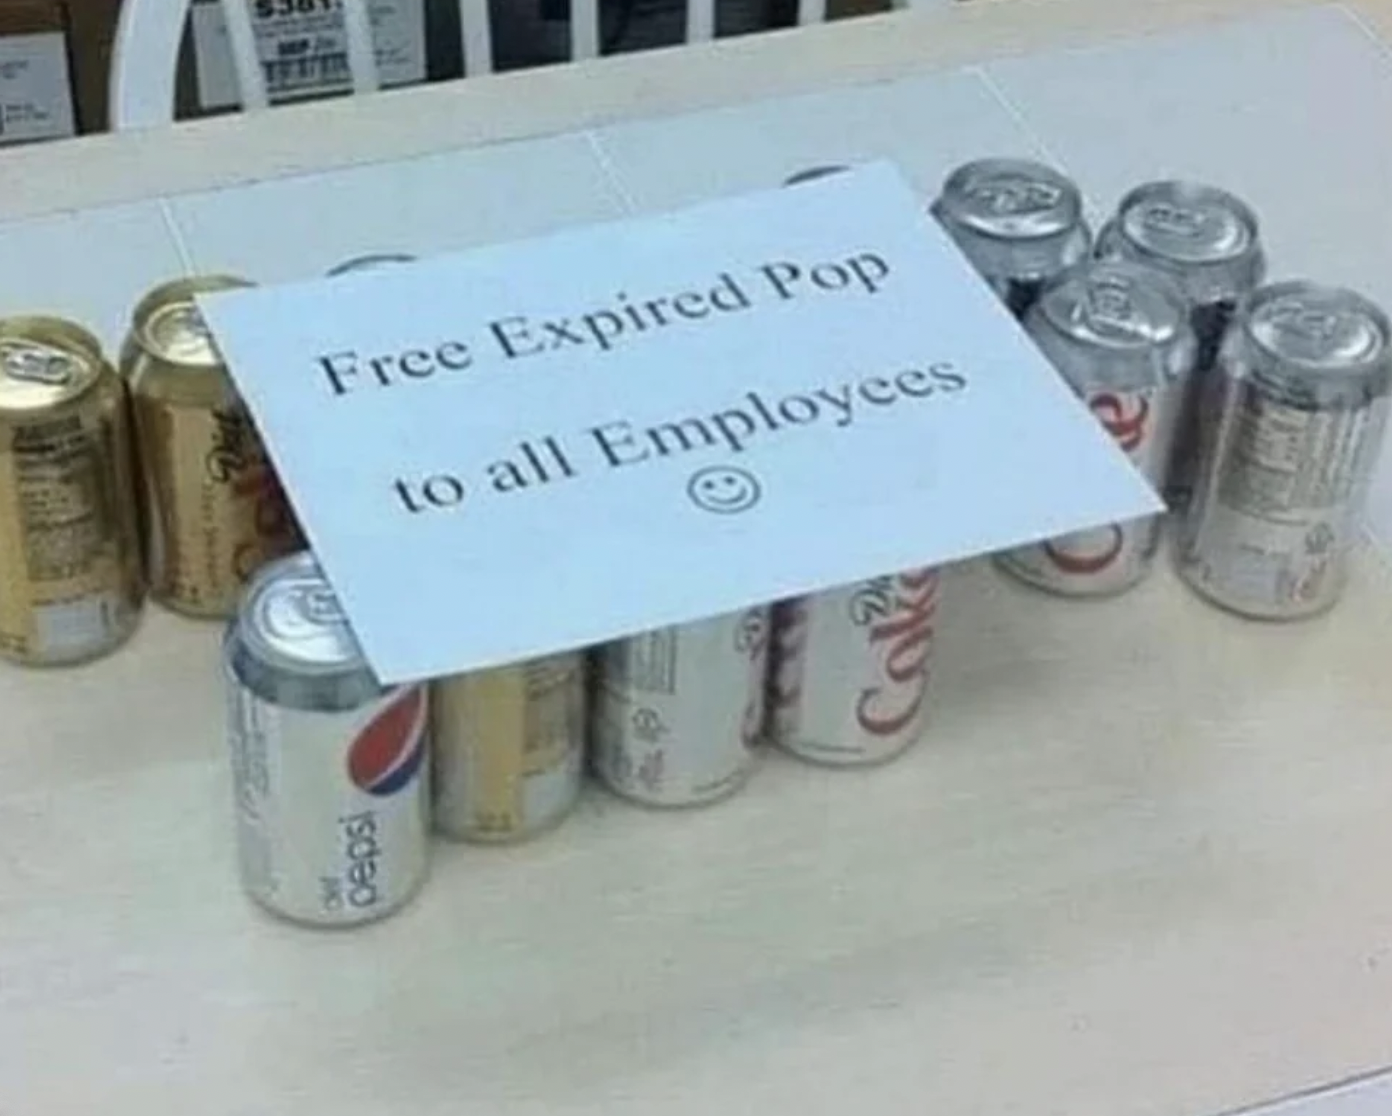 Free Expired Pop to all Employees sded